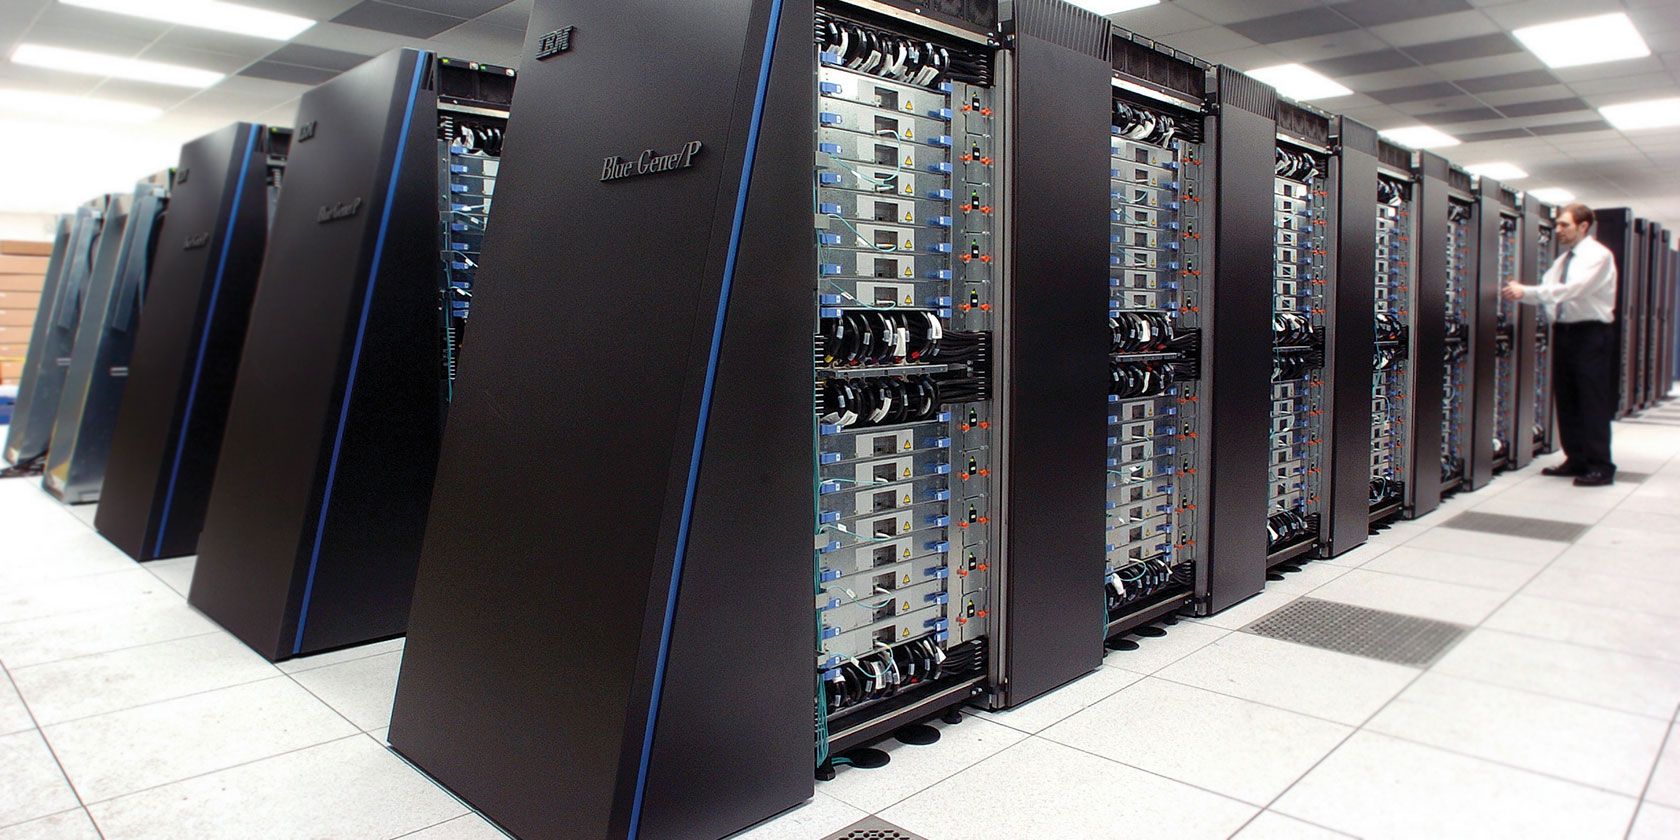 What Is a Supercomputer? The Top 10 Supercomputers in the World